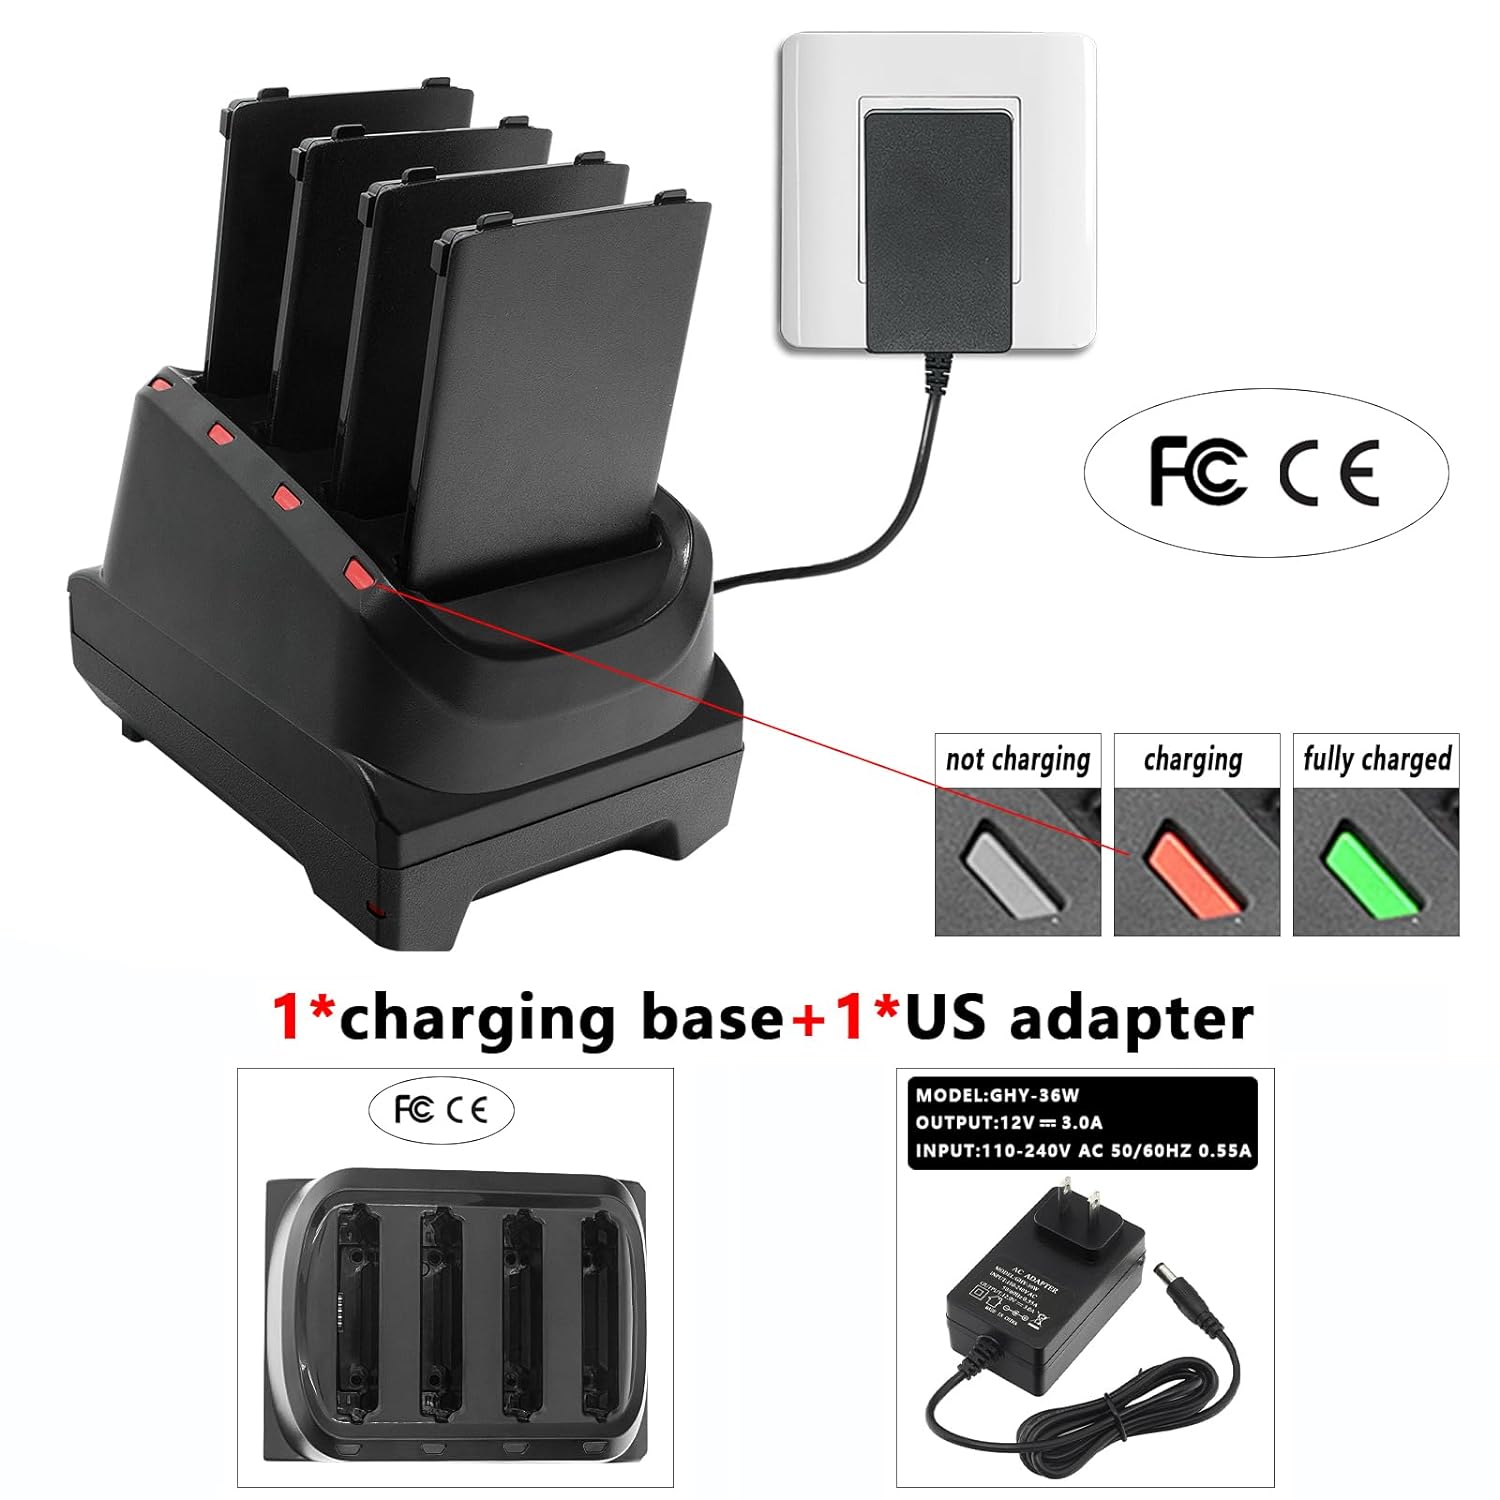 4-Slot Battery Charger for Zebra TC21 TC26 Handheld Android PDA Phone Barcode Scanner(SAC-TC2Y-4SCHG-01) 12V4A Includes Adapter & LED Charging Indicator